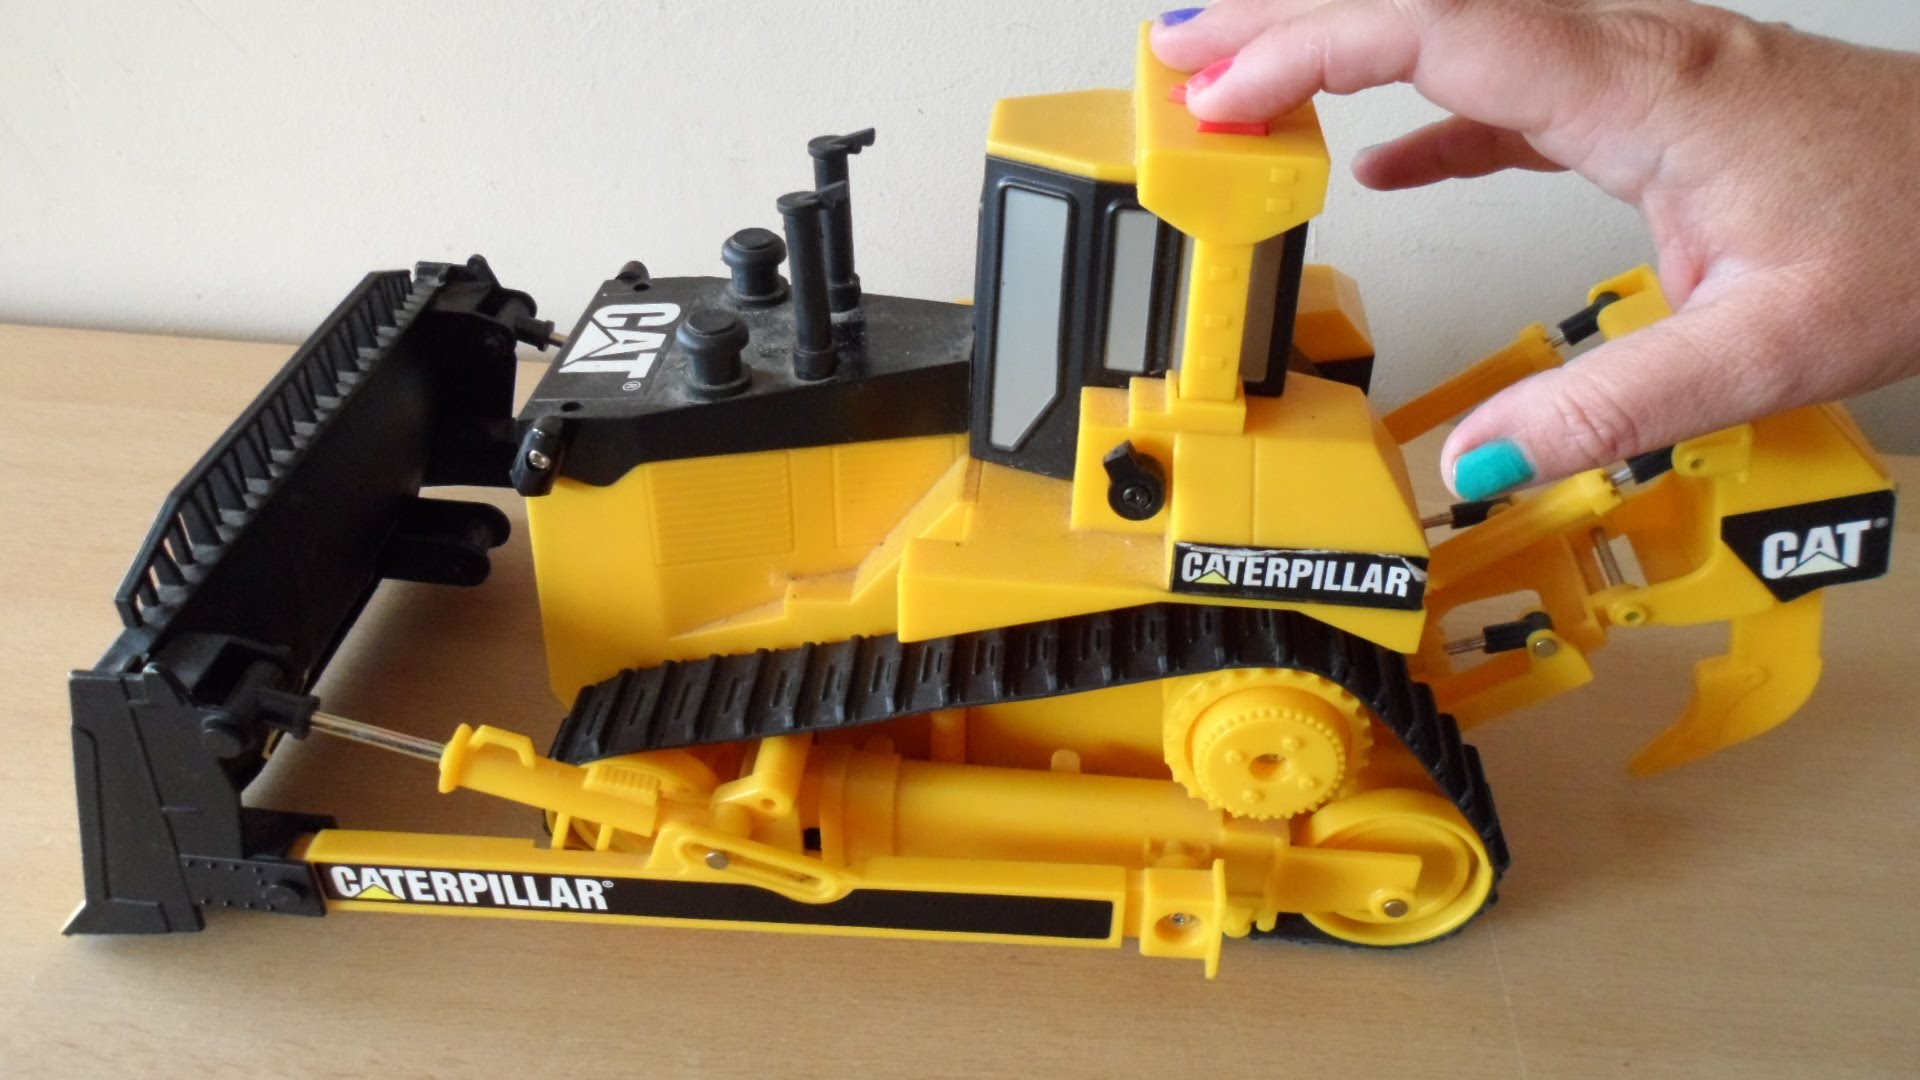 OVERVIEW OF THE CATERPILLAR TOY BULLDOZER - YouTube